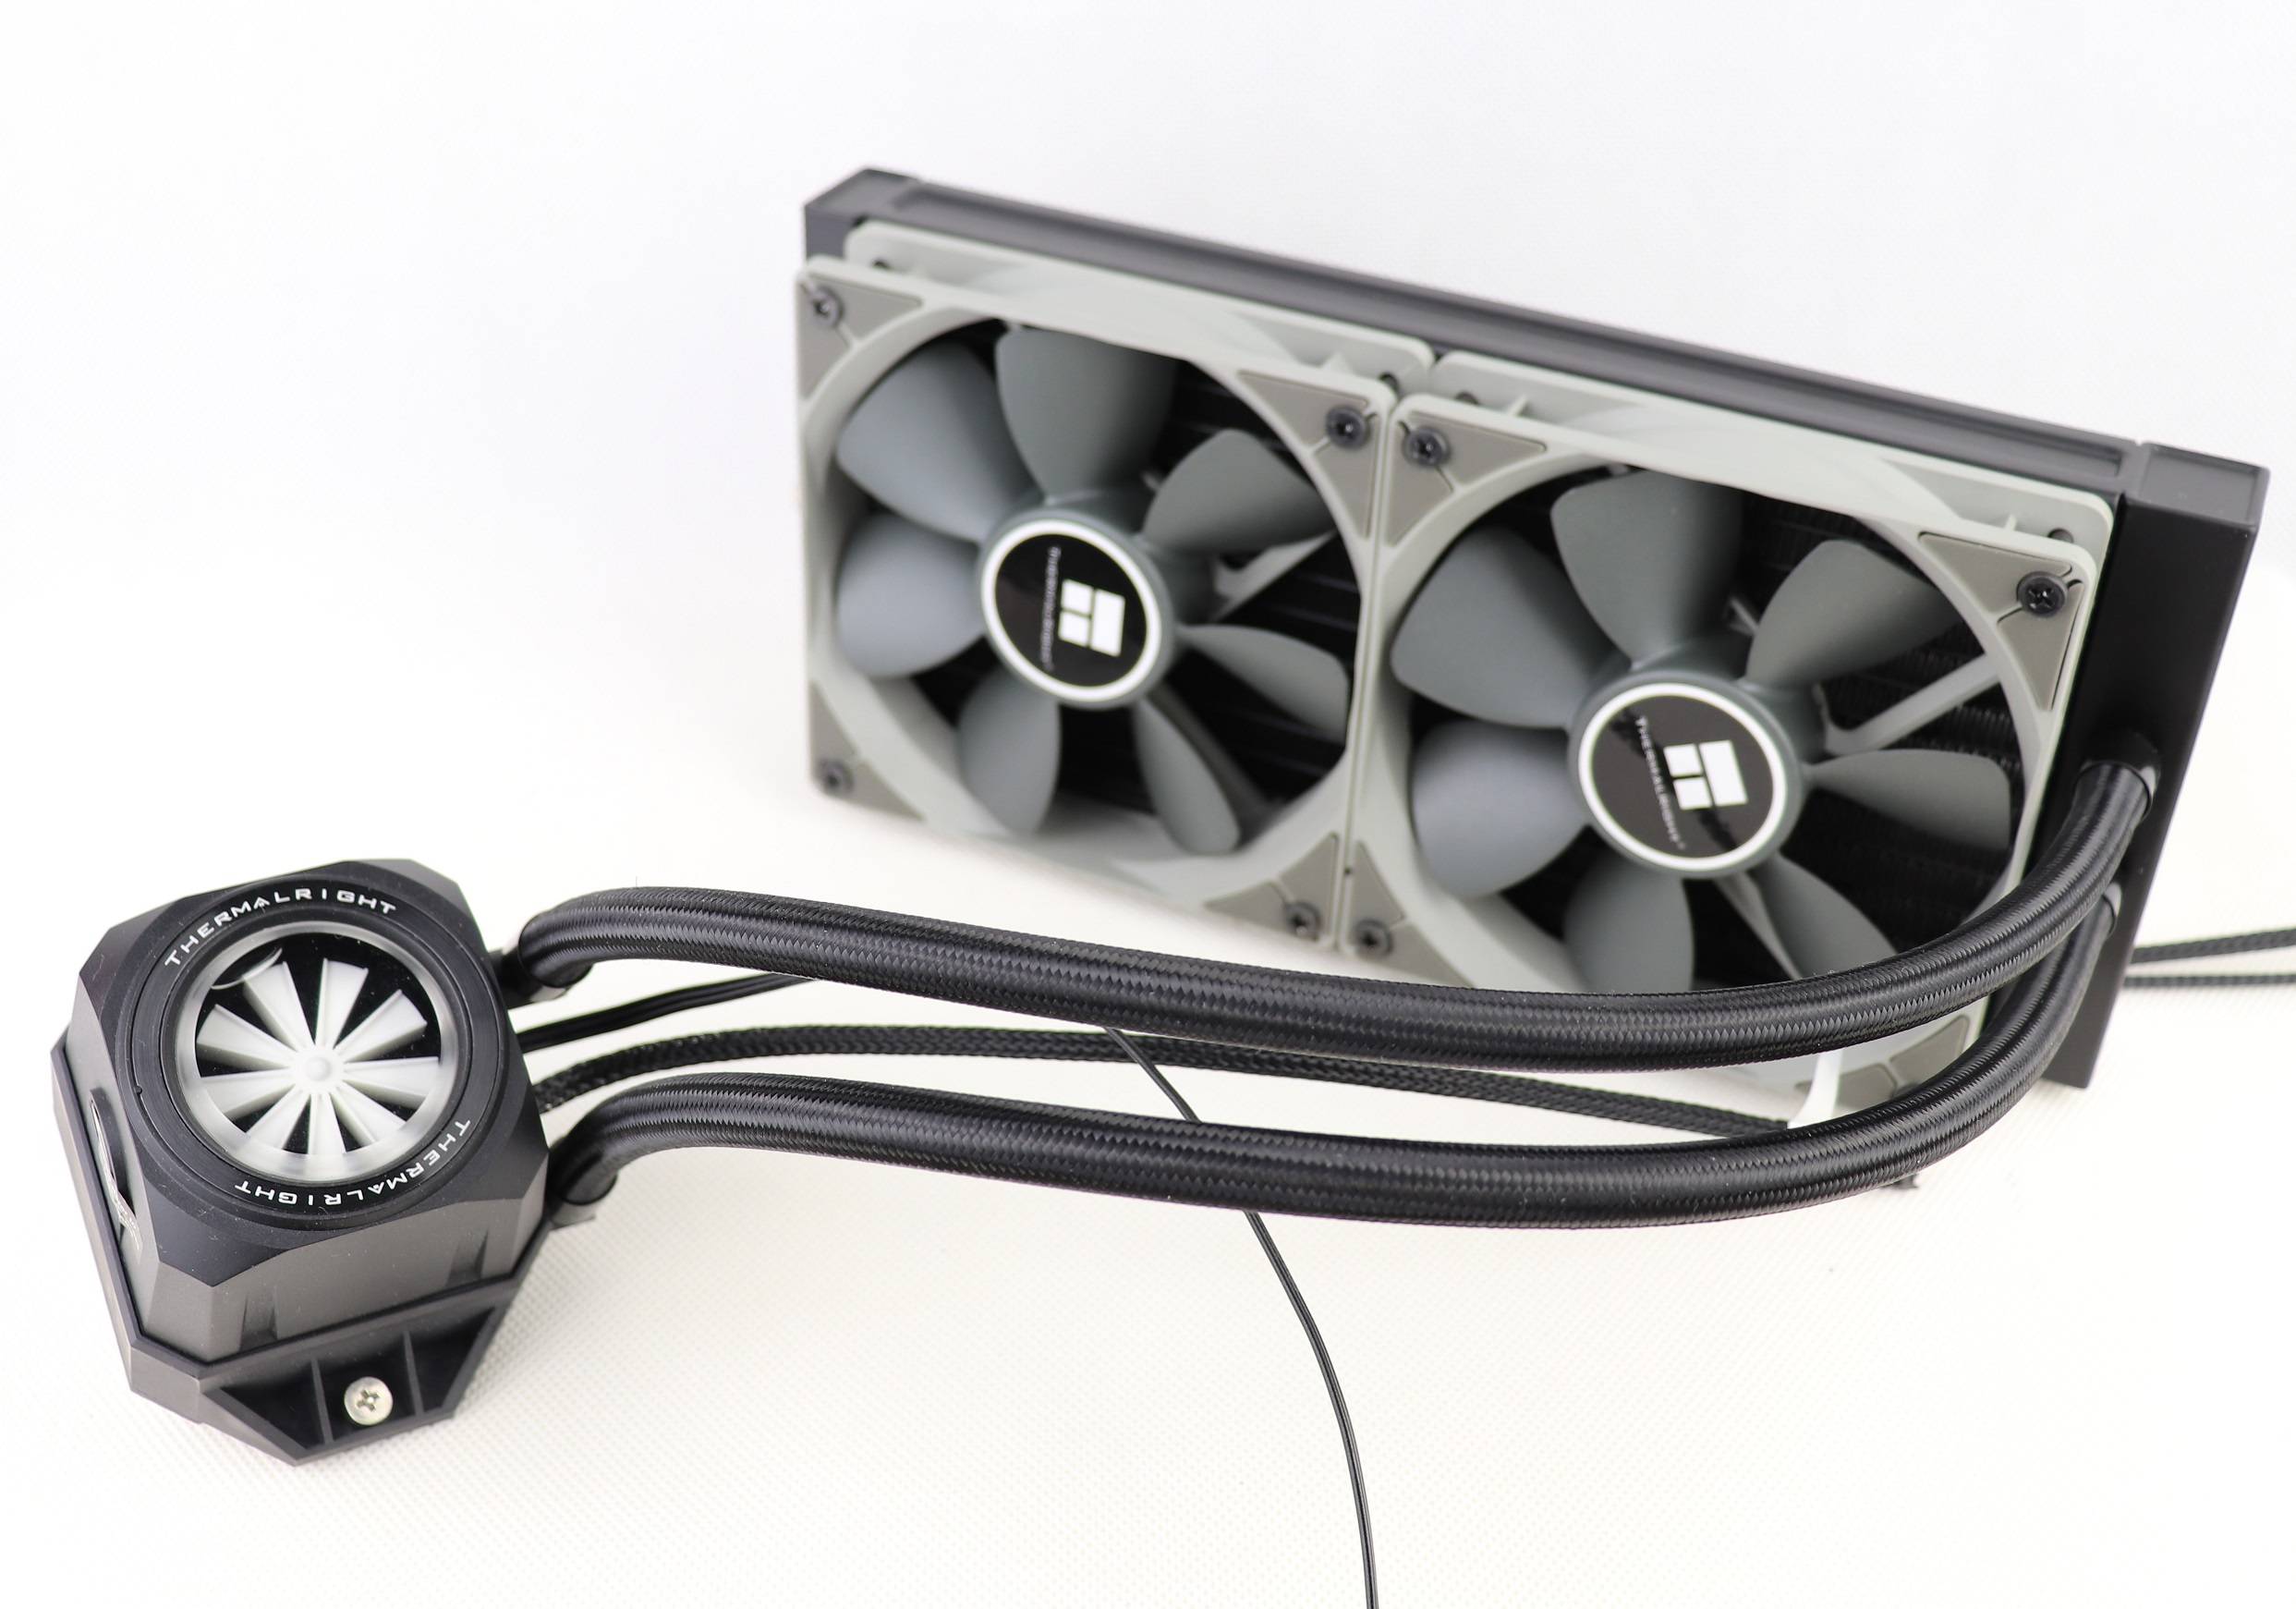 Unboxing and Review of Thermalright Turbo Right 240/360 C AIO CPU Cooler